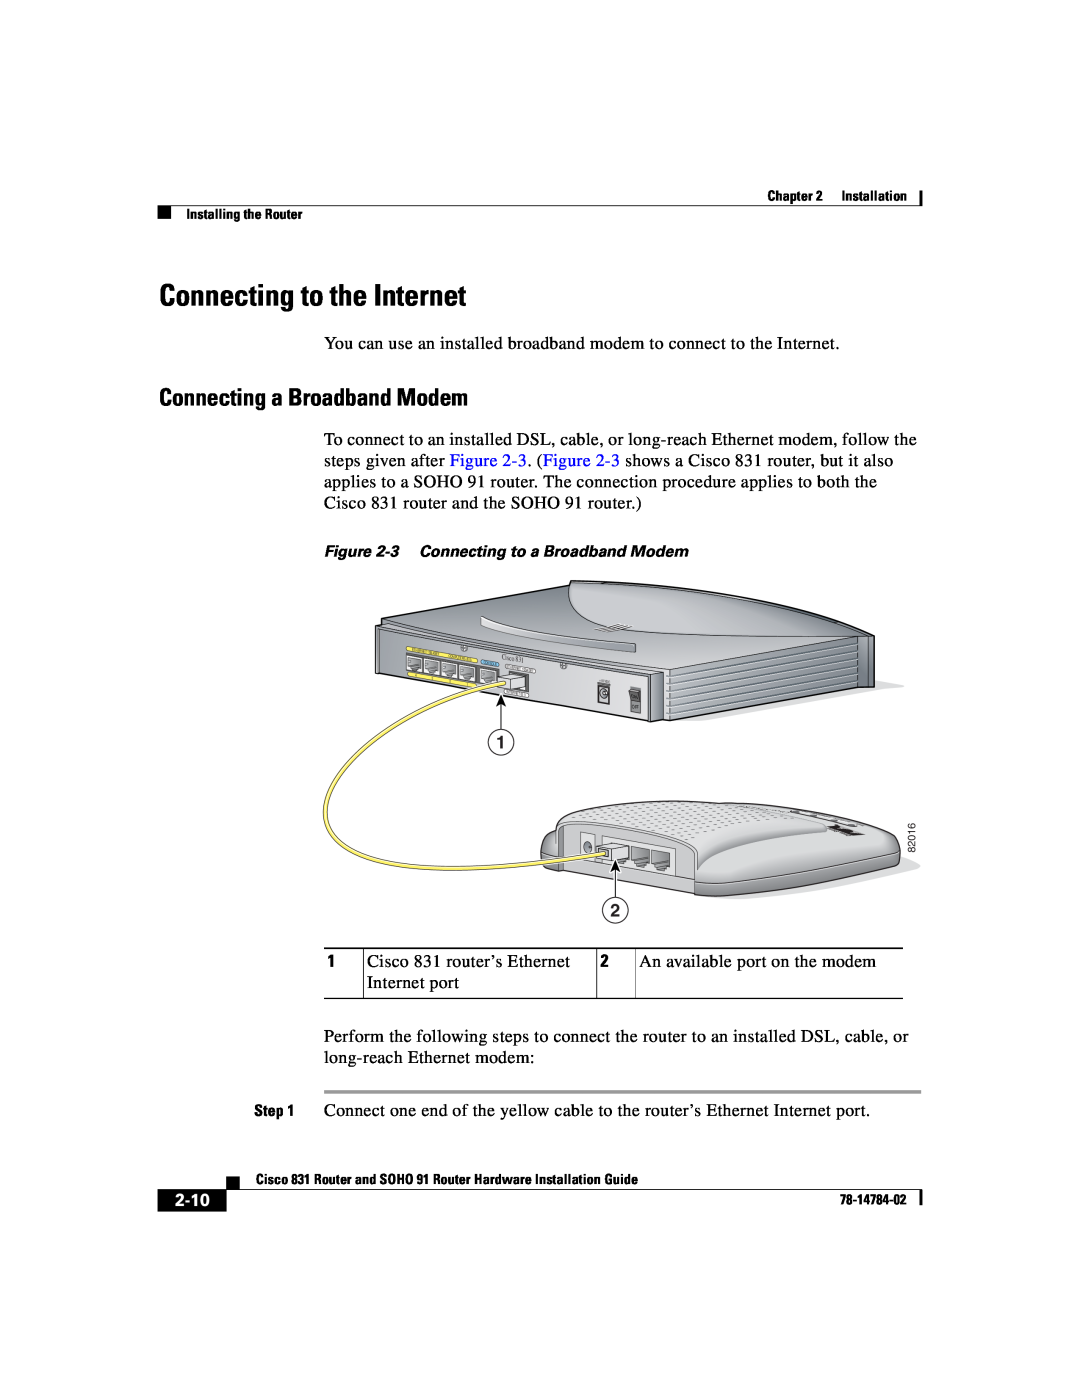 Cisco Systems 78-14784-02 manual Connecting to the Internet, Connecting a Broadband Modem, 2-10 